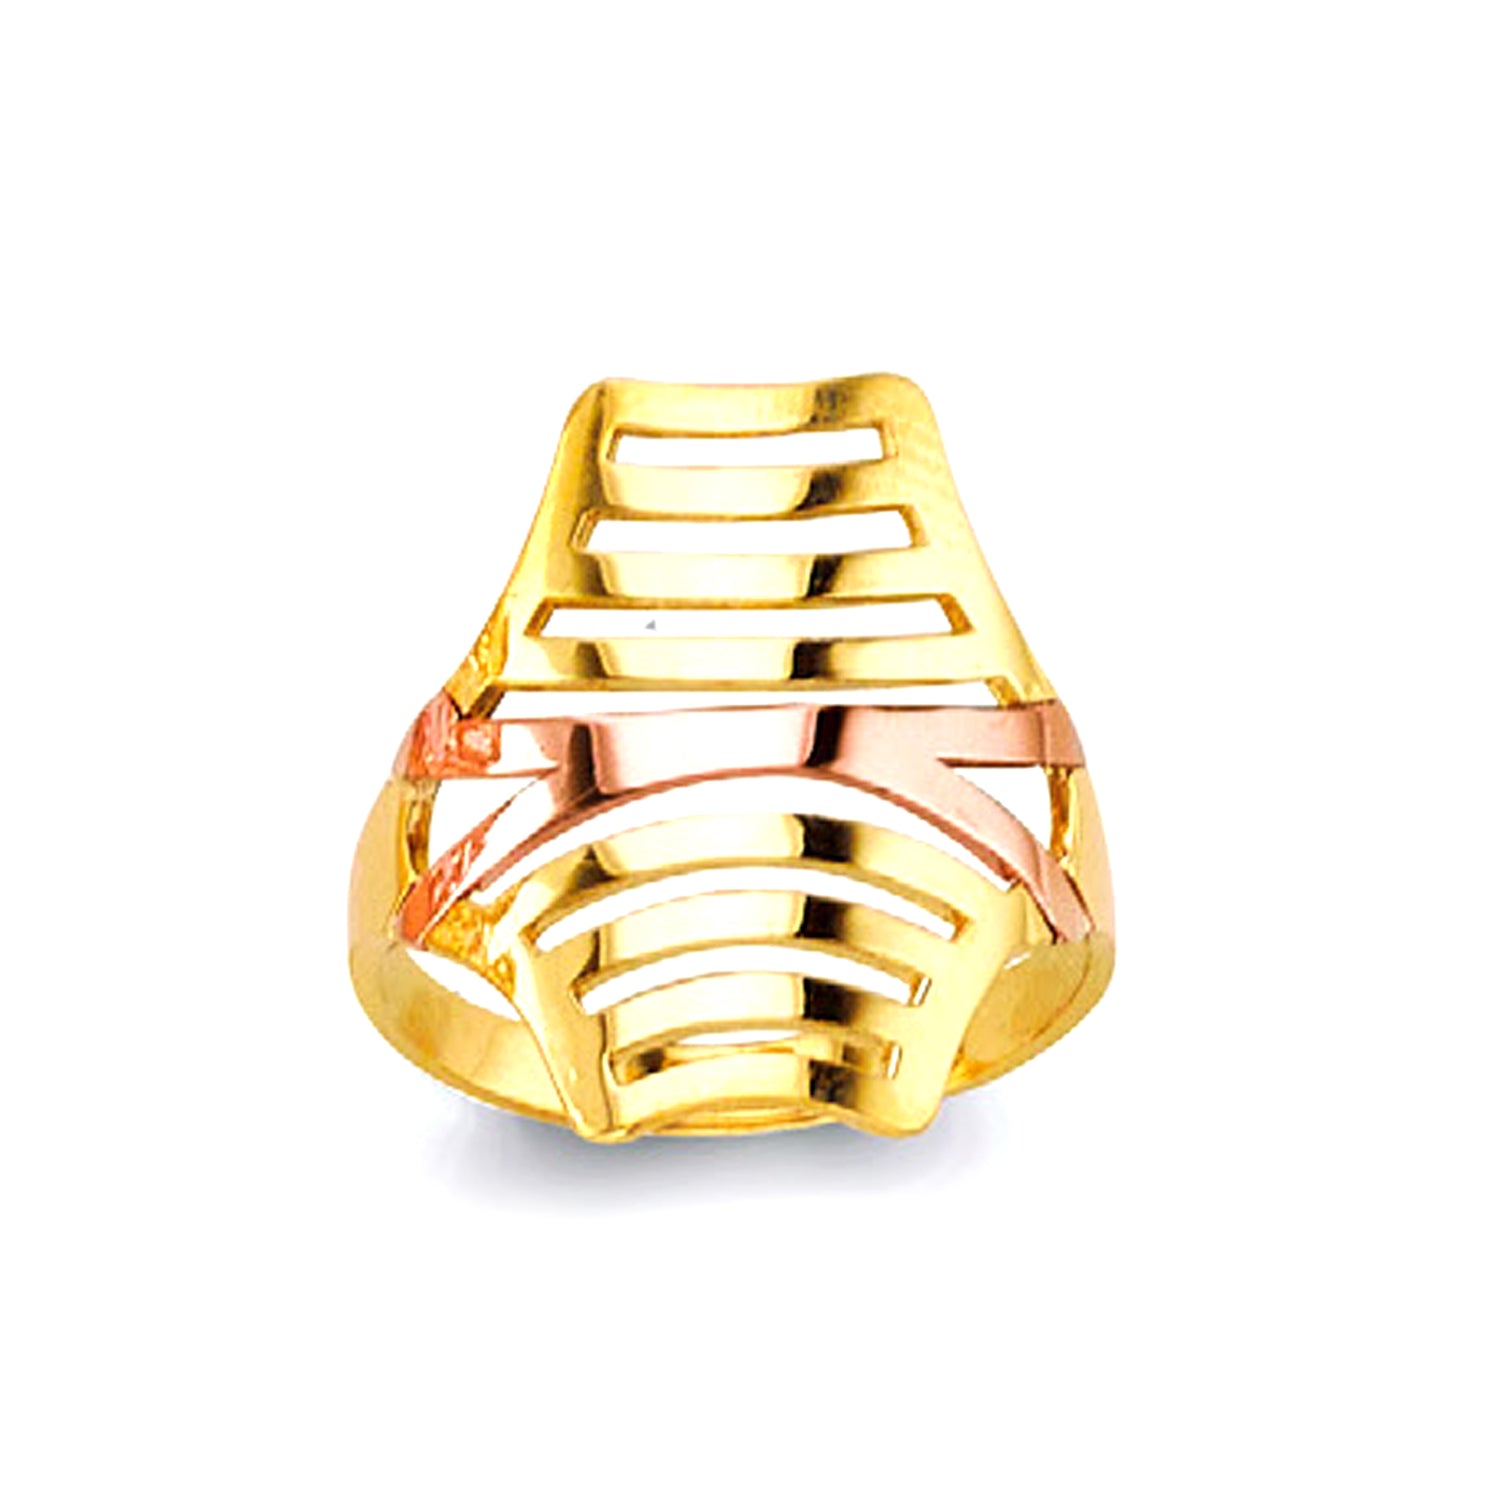 Anomaly Antique Ring in Solid Gold 